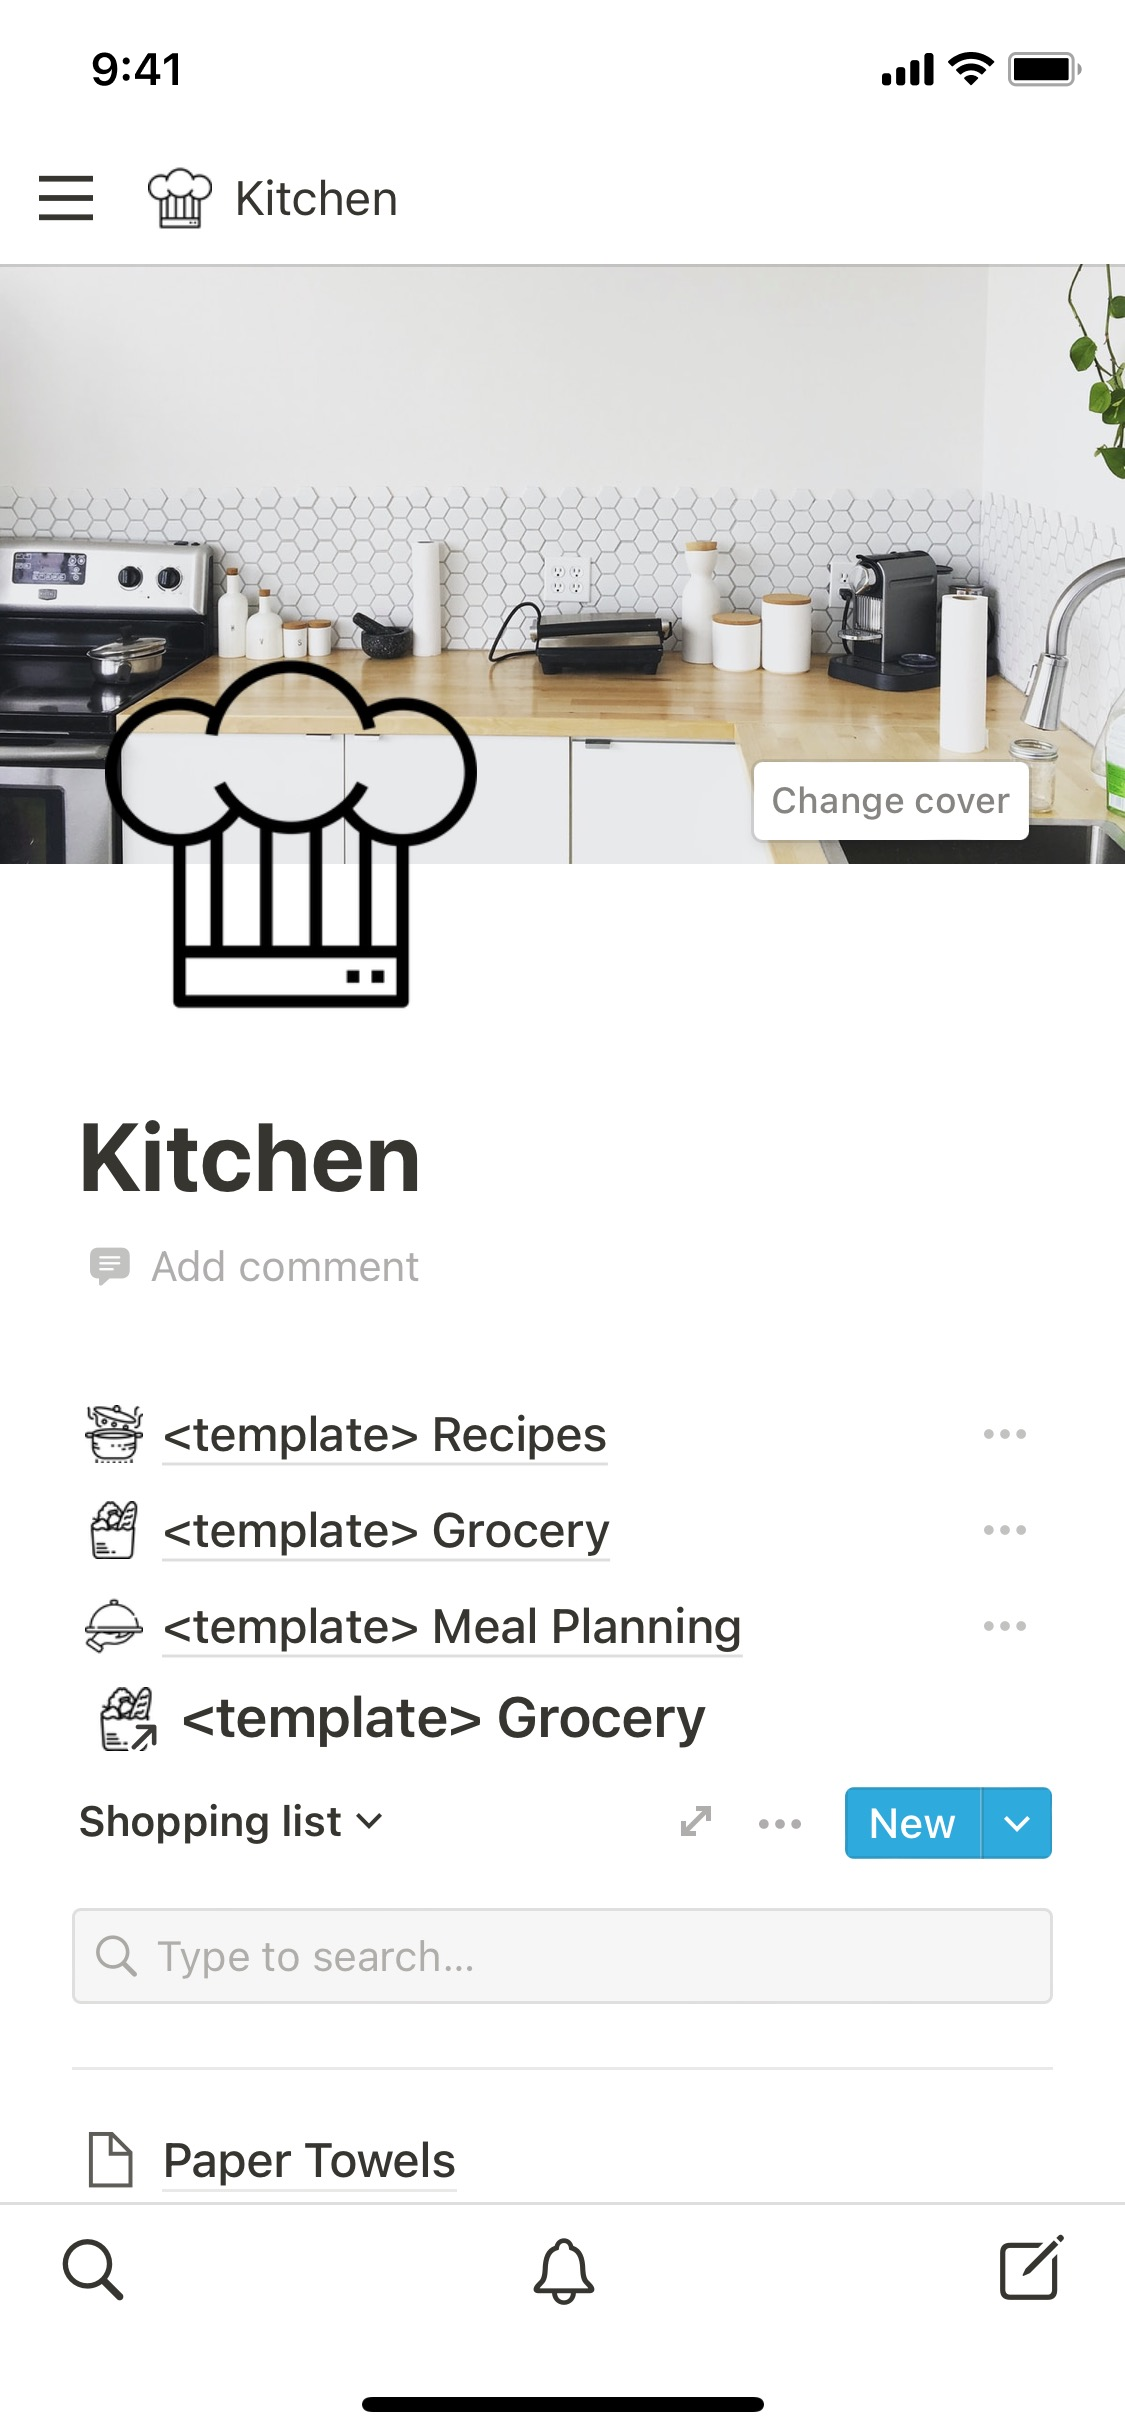 The mobile image for the Kitchen template